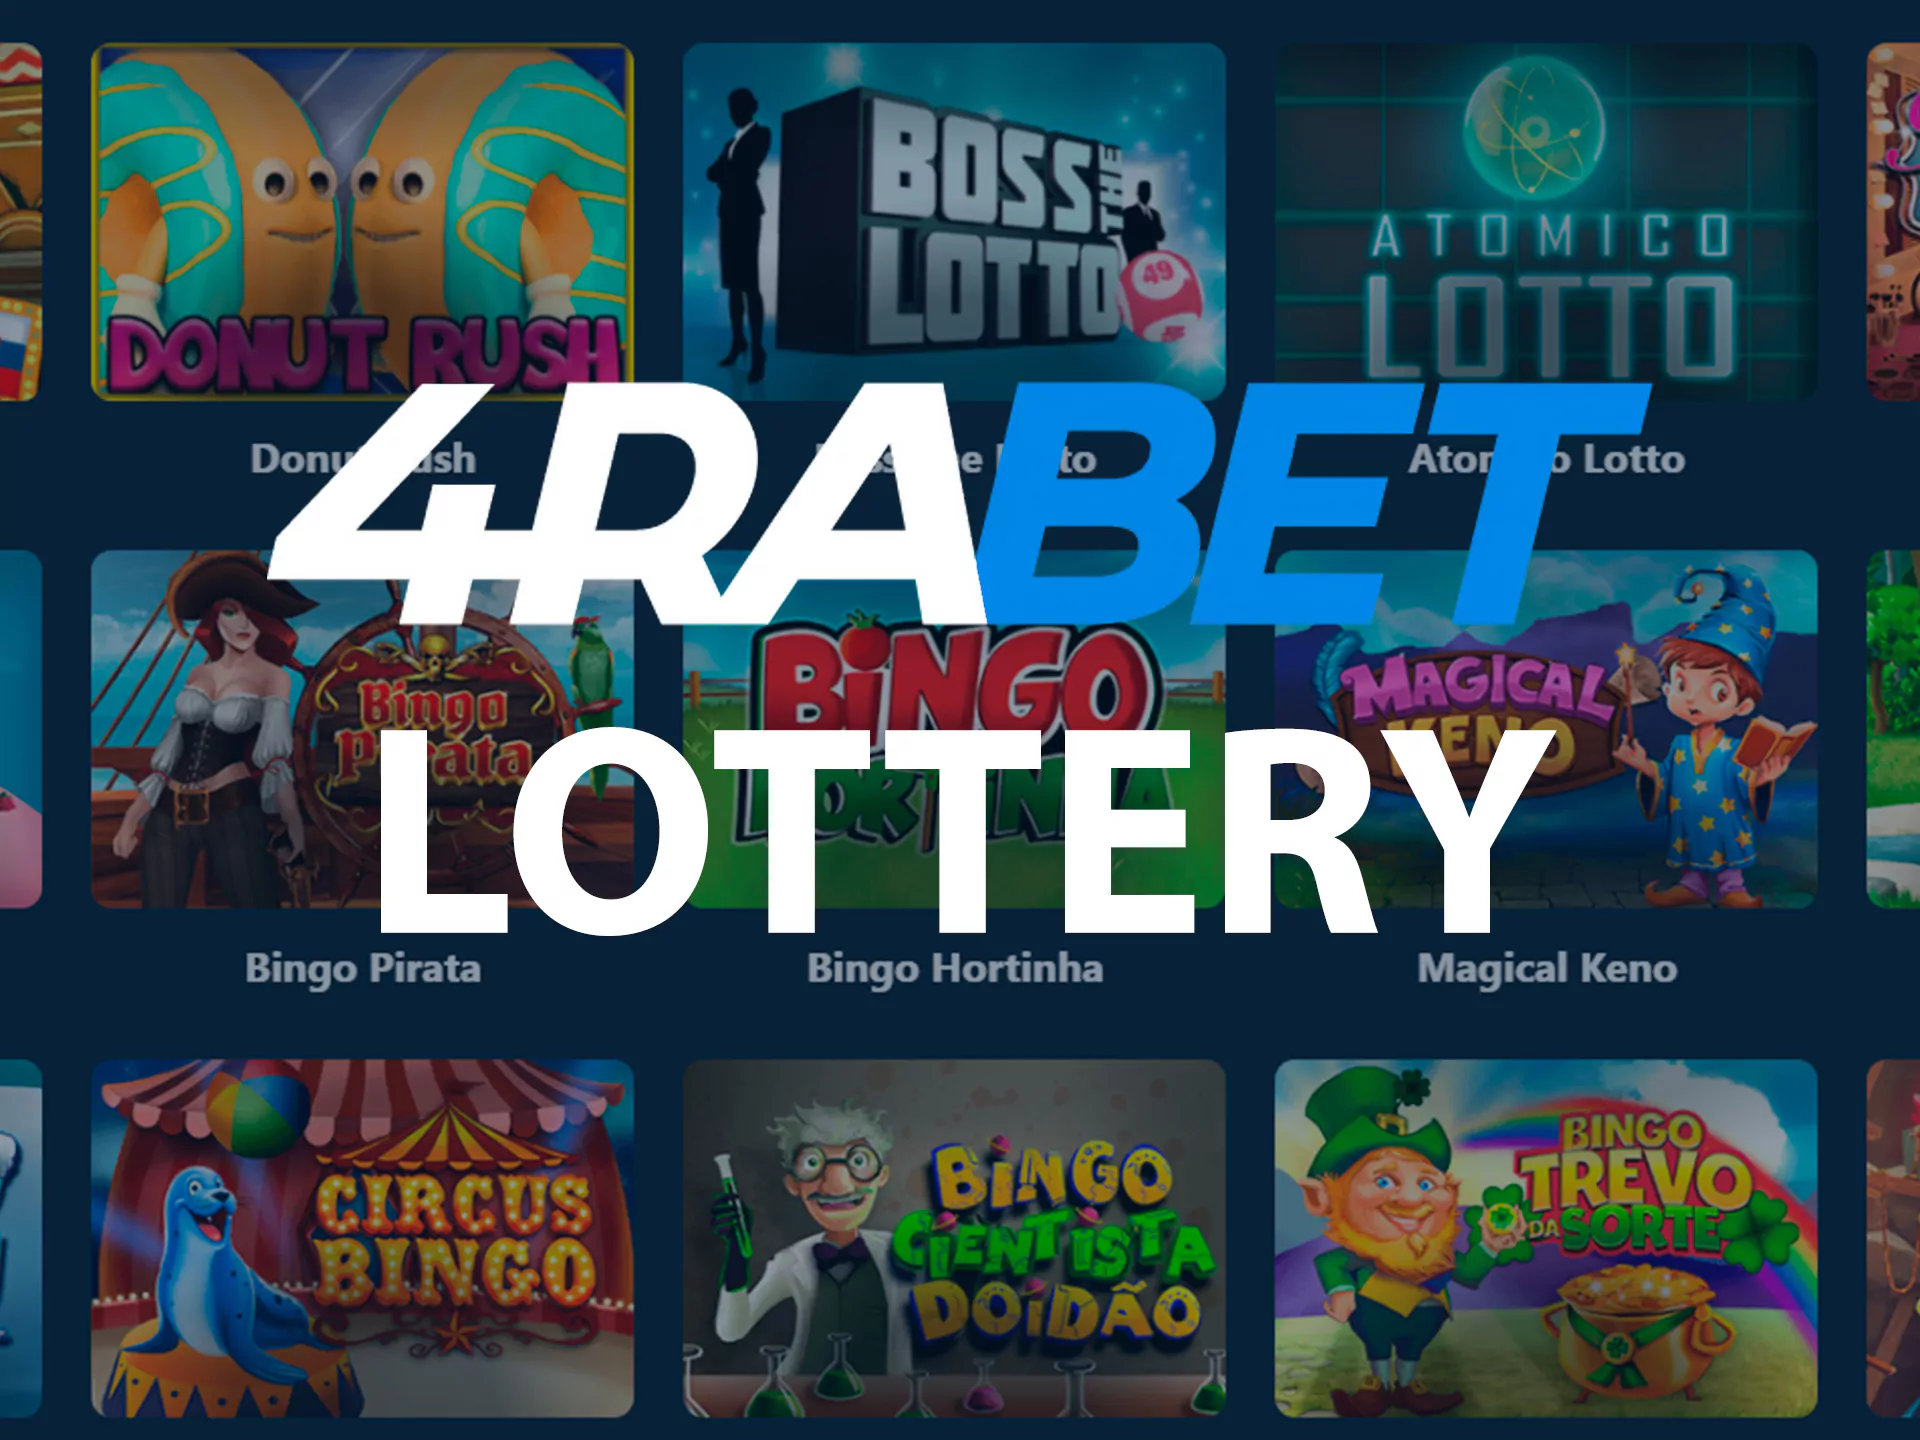 Try to get a big win in the 4rabet lottery.